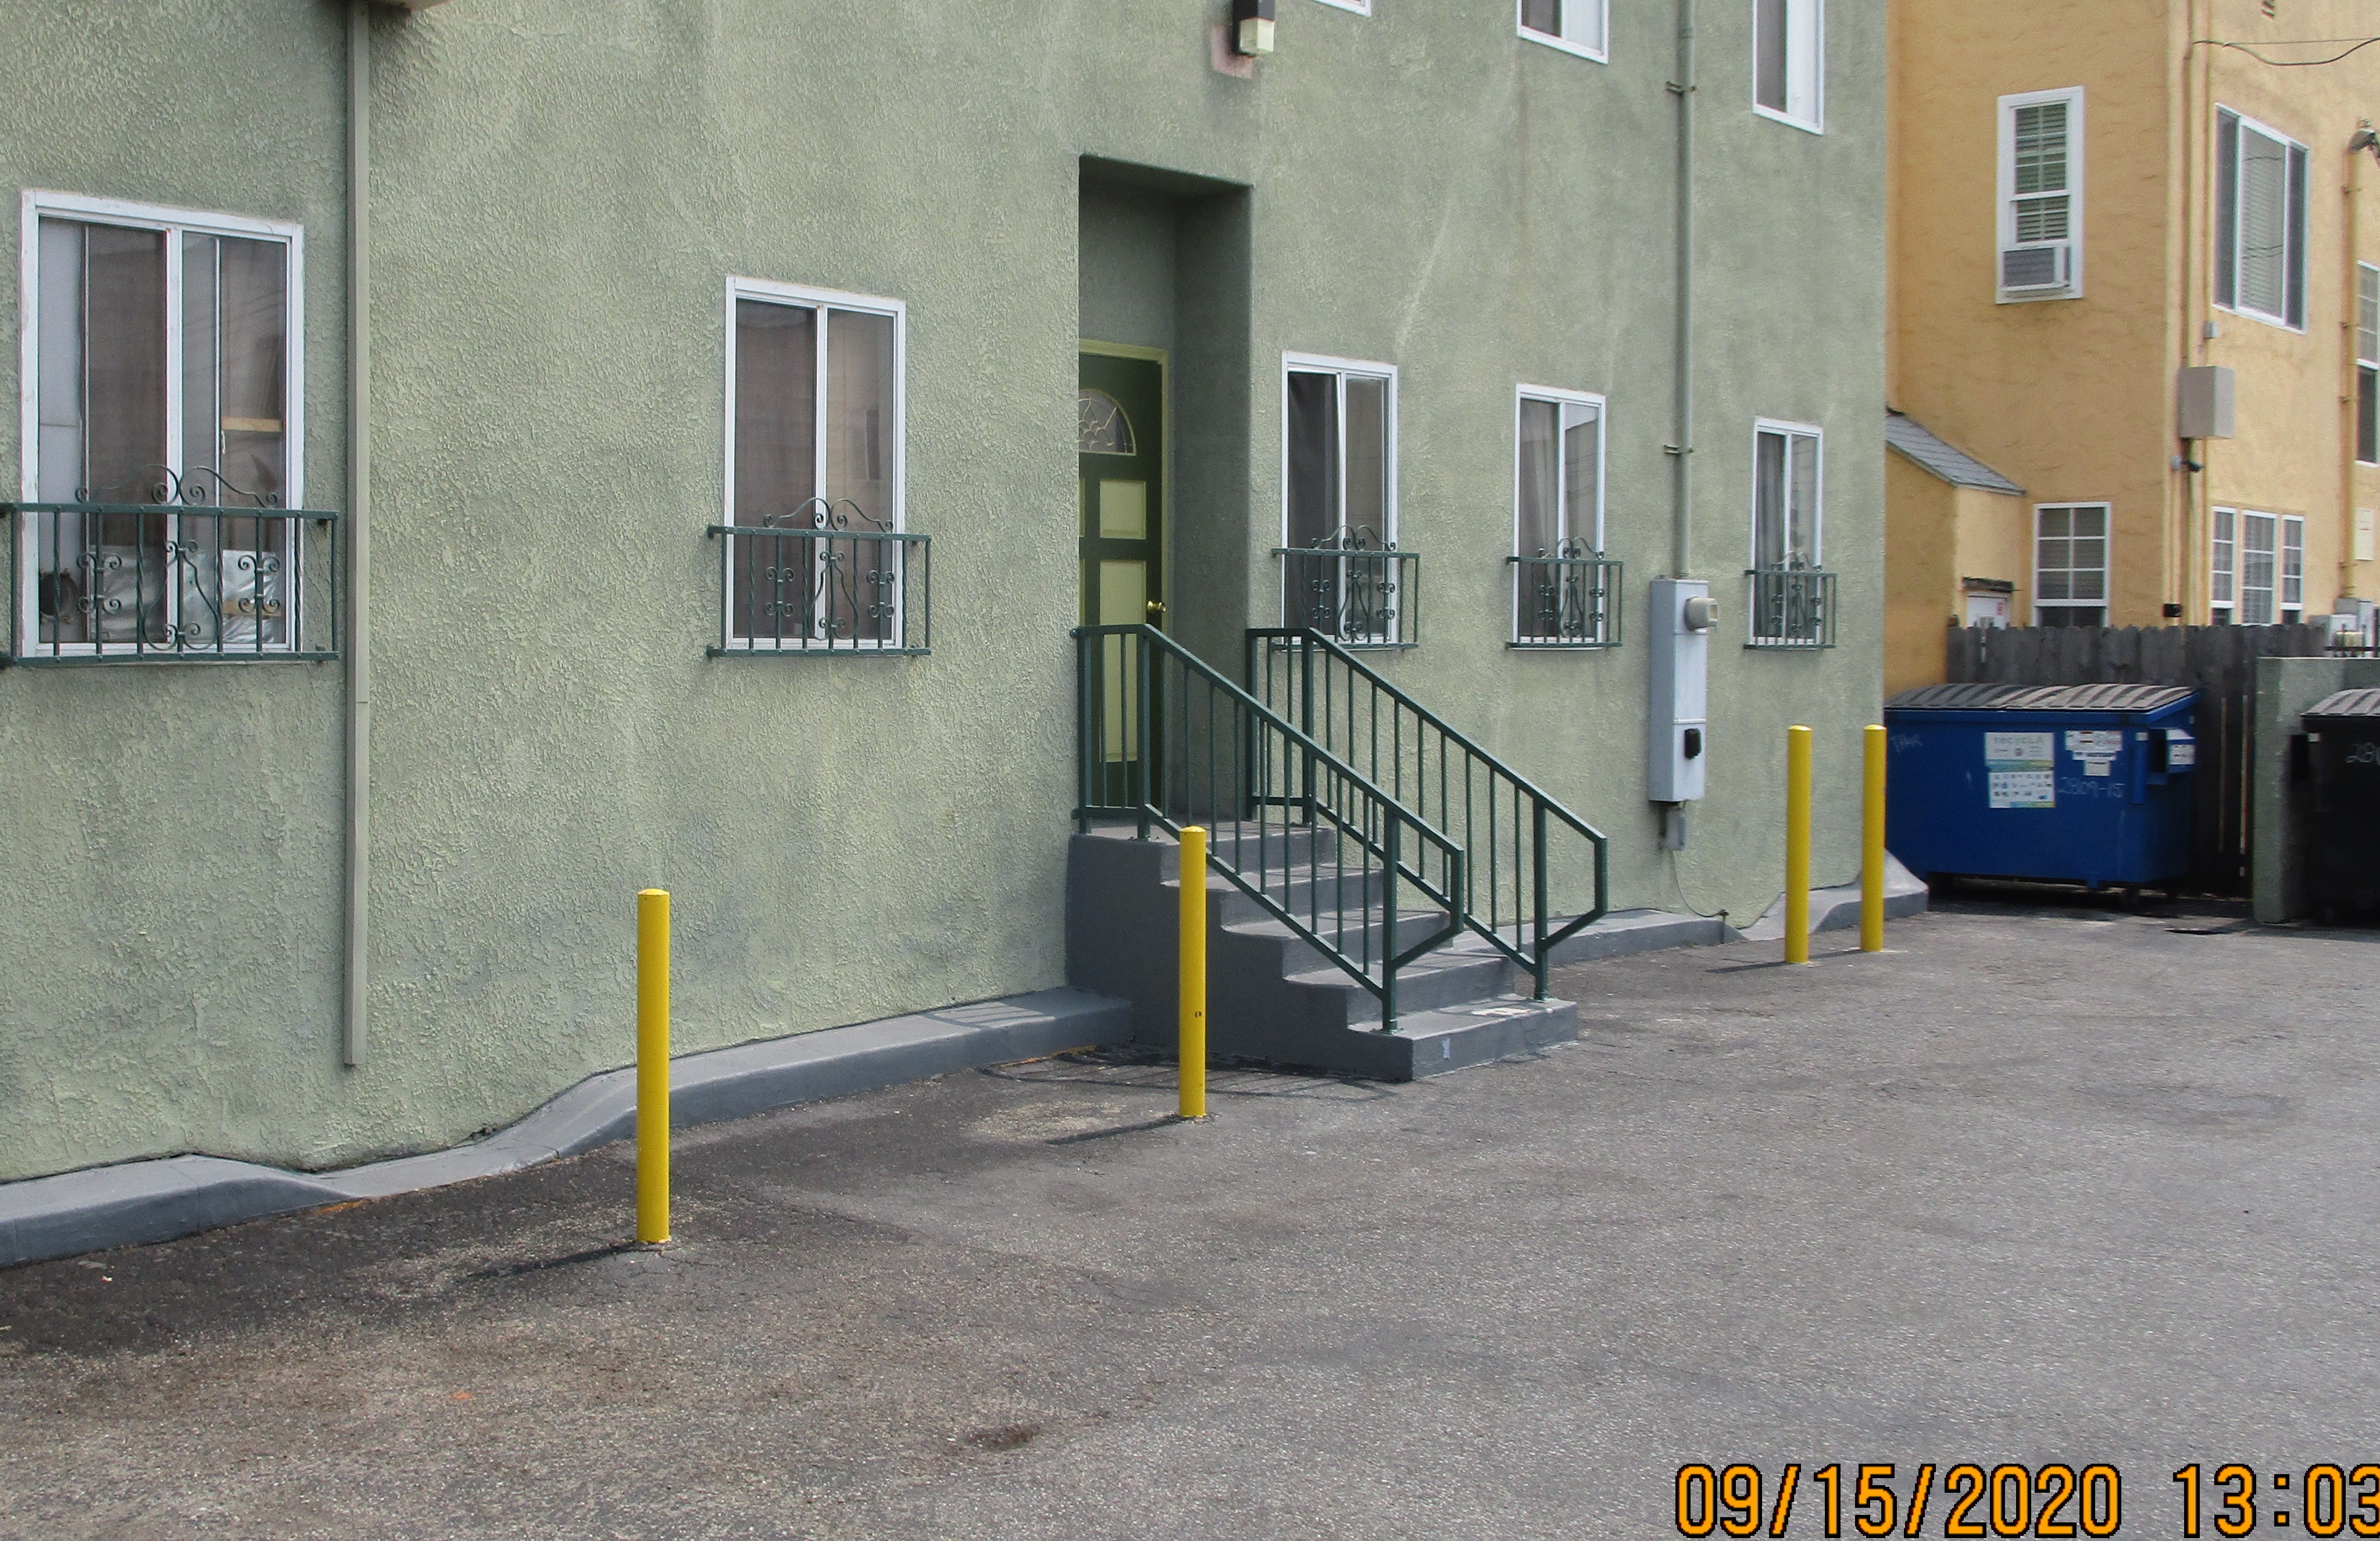 Image of the building entrance with stairs, windows on both sides of the entrance, and vertical yellow parking poles.